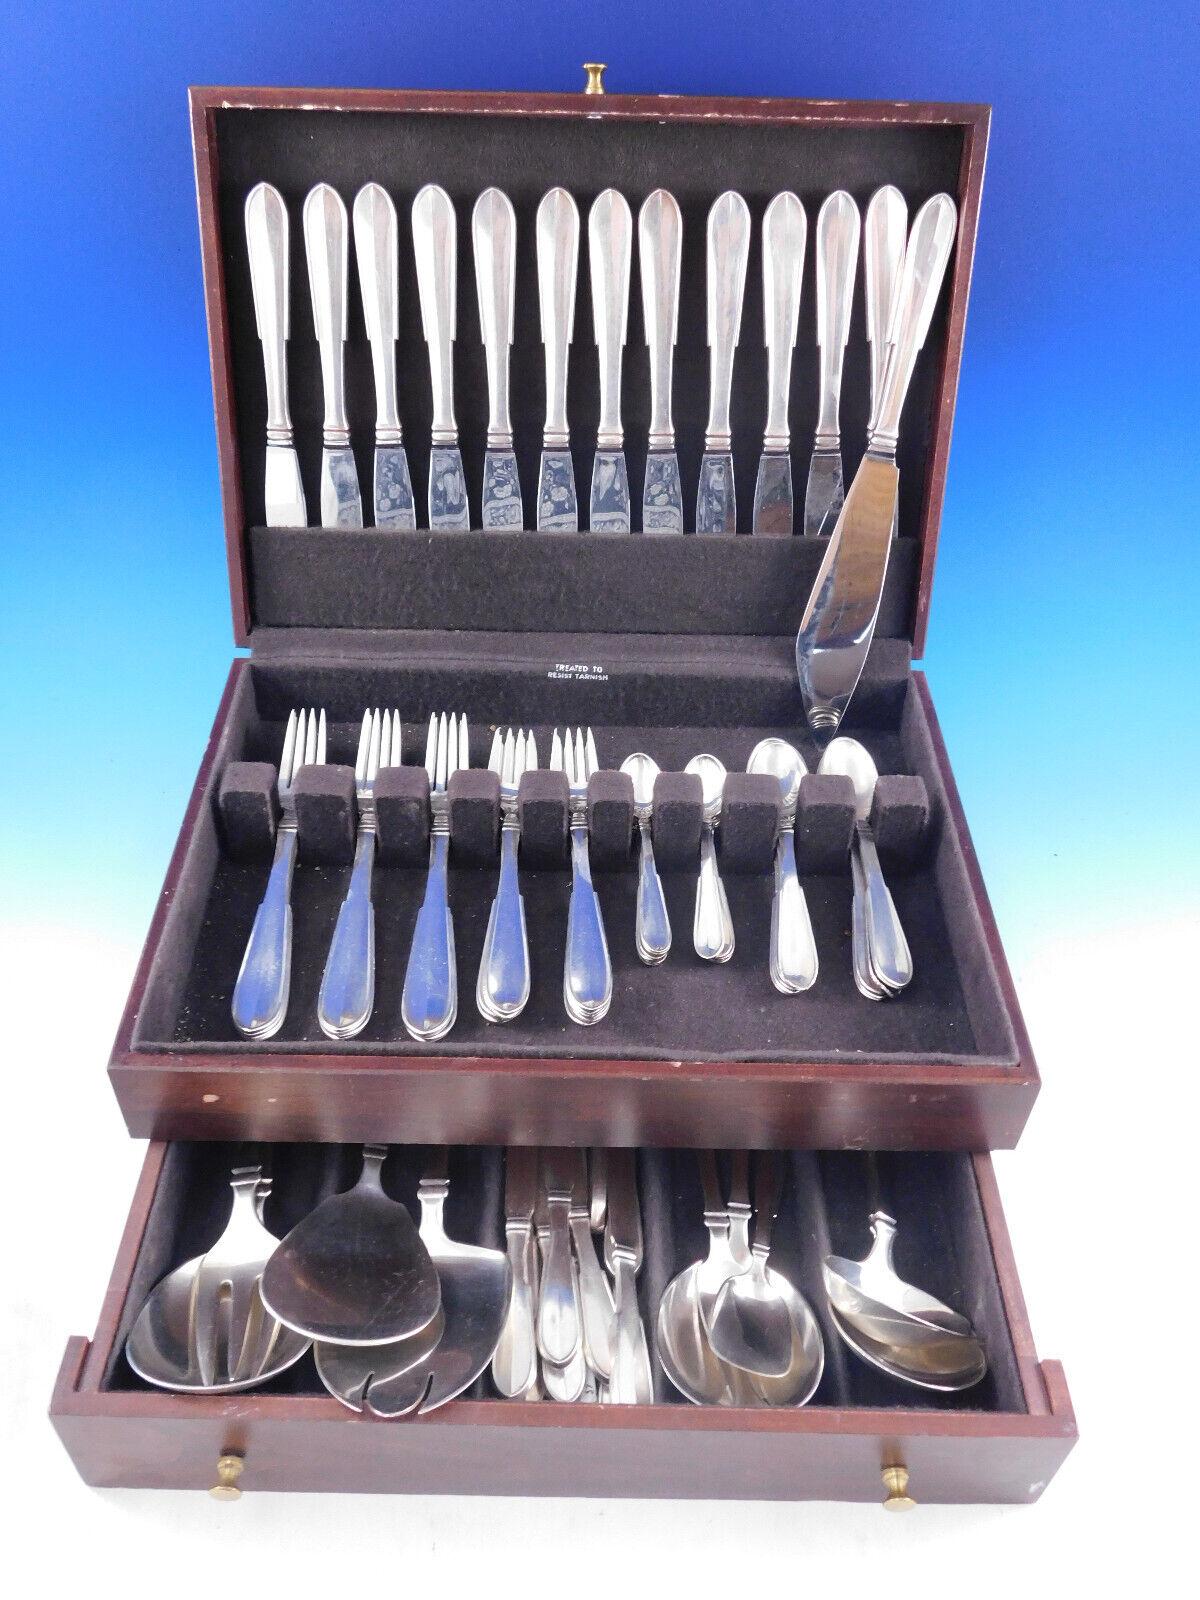 Scarce Arvesolv No. 1 by Hans Hansen Danish Sterling Silver Flatware set - 82 pieces. This set includes:


12 Knives, long handle, 8 3/4